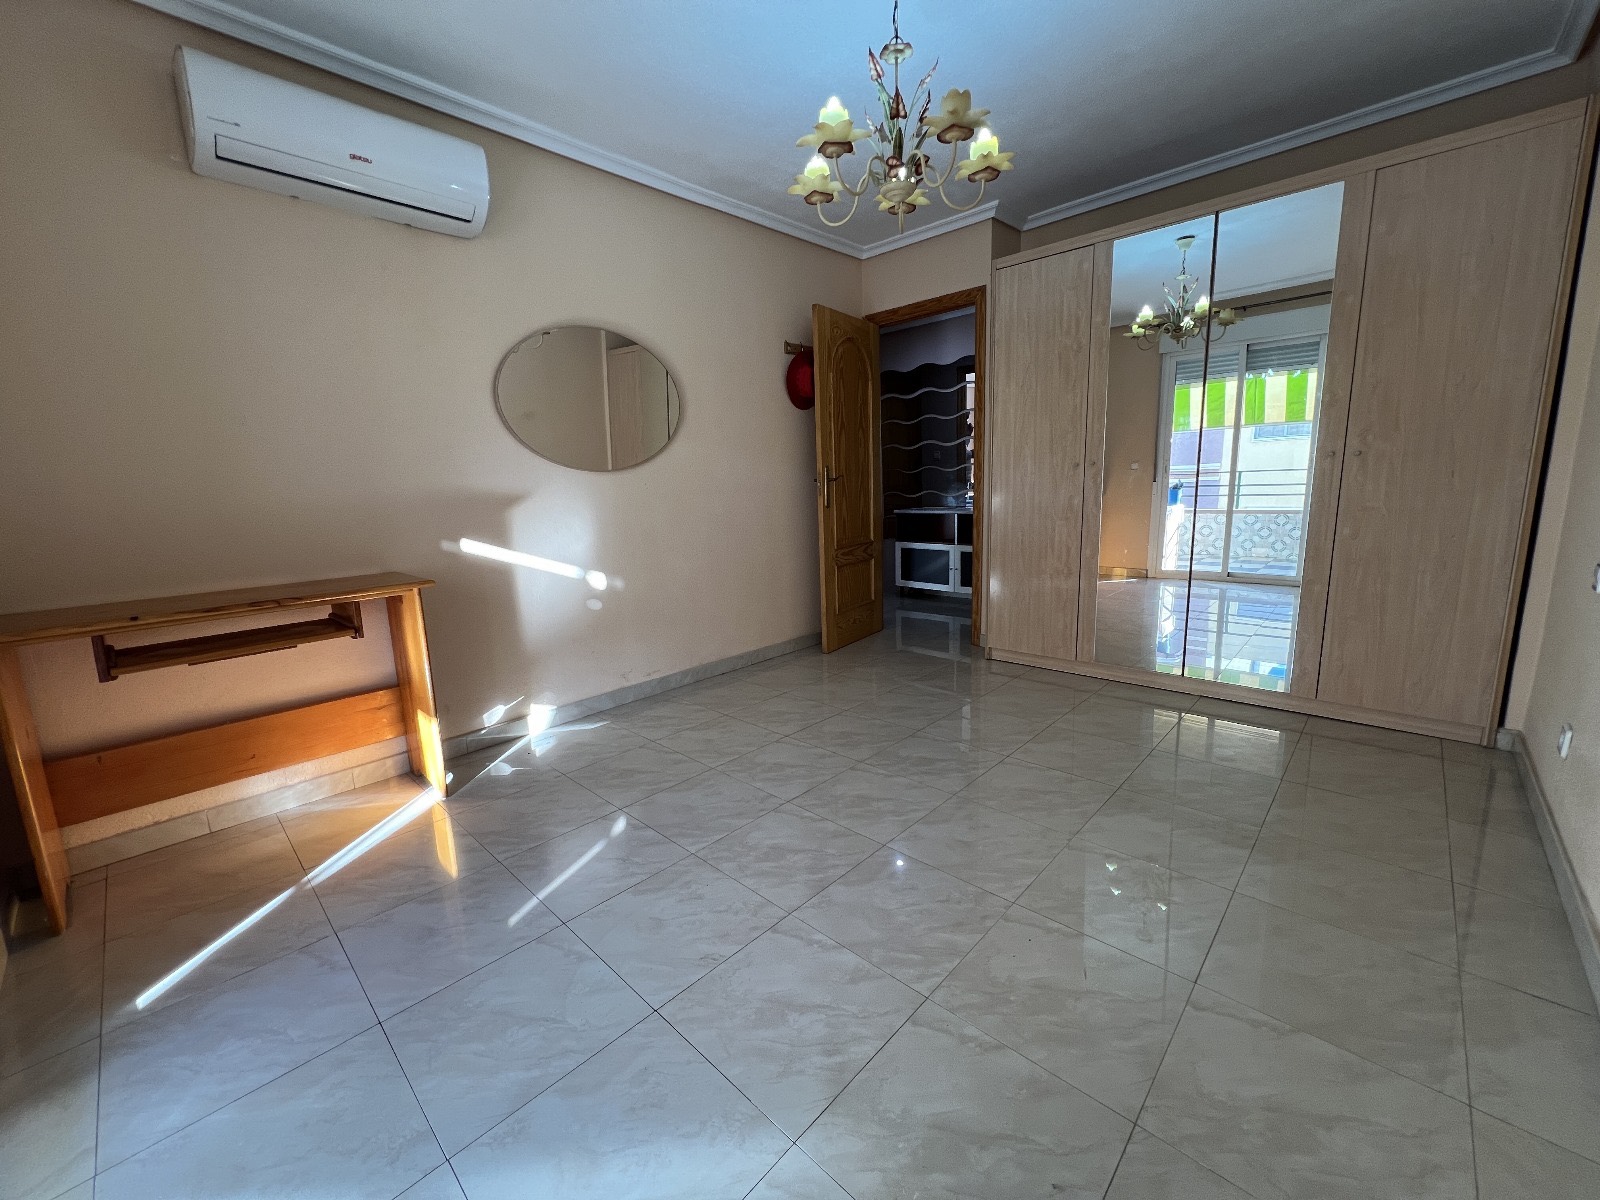 3 BED APARTMENT CLOSE TO THE SEA IN TORREVIEJA.